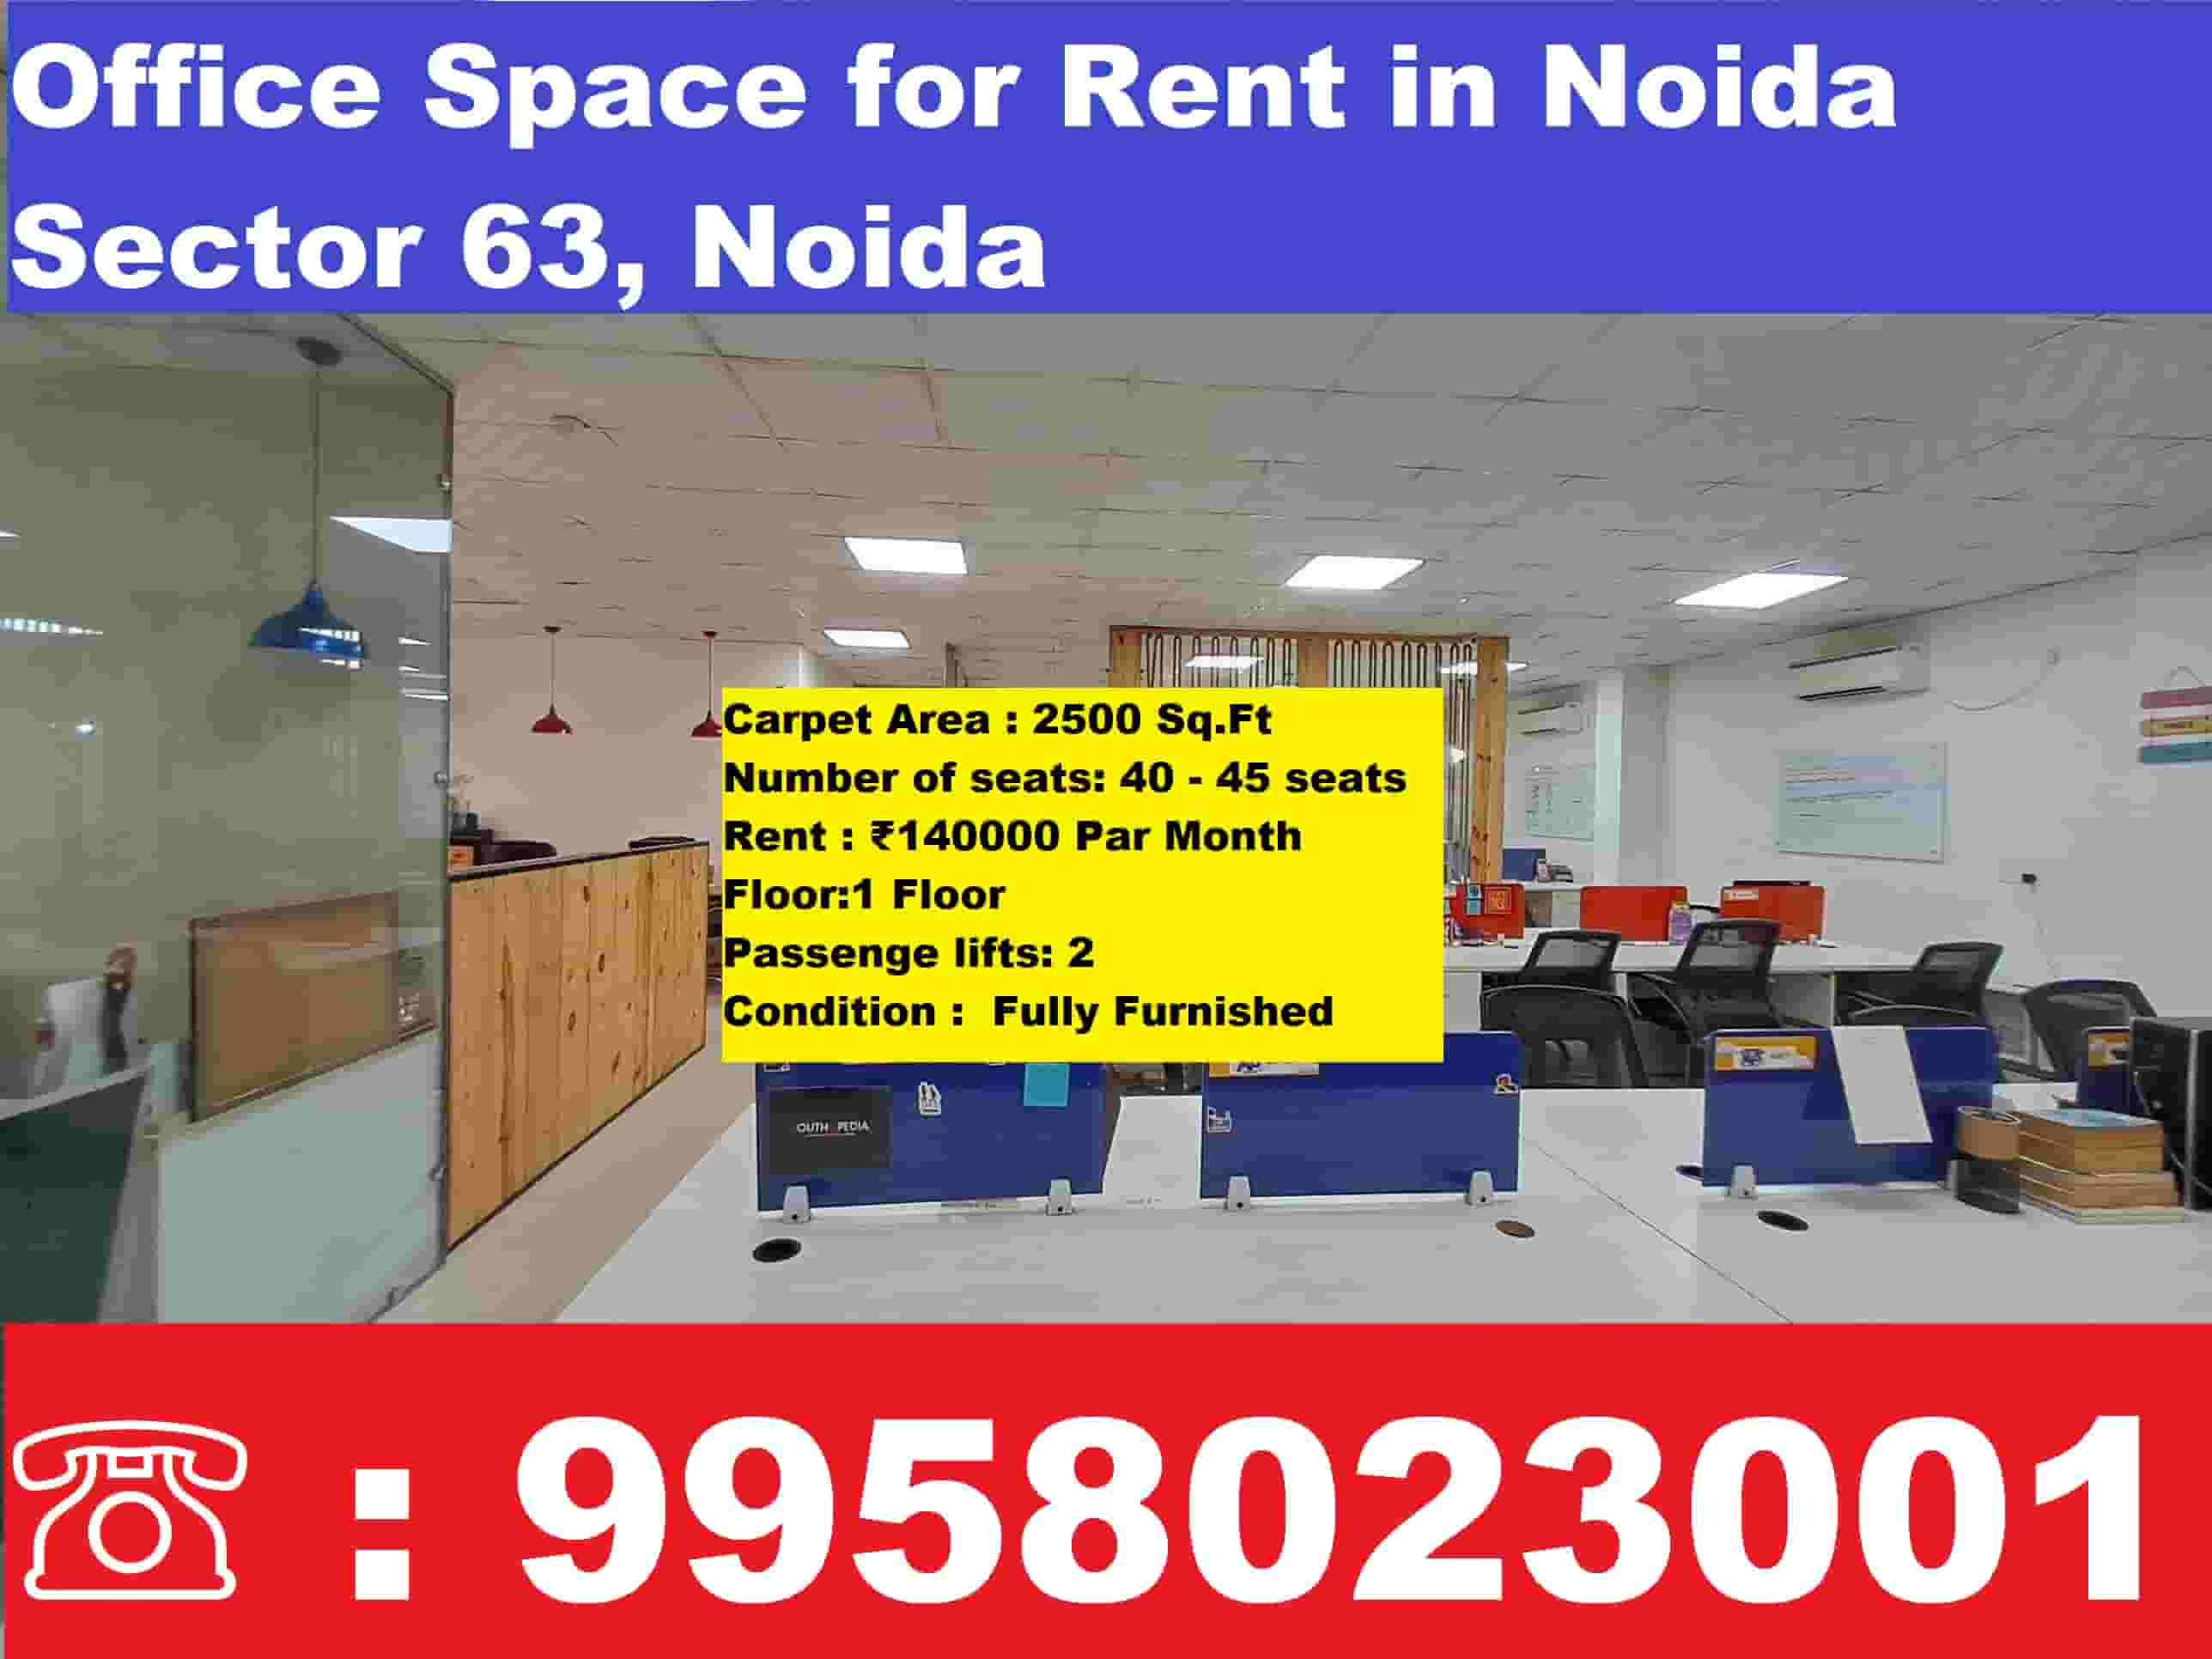 Office Space for Rent in Sector 63 Noida